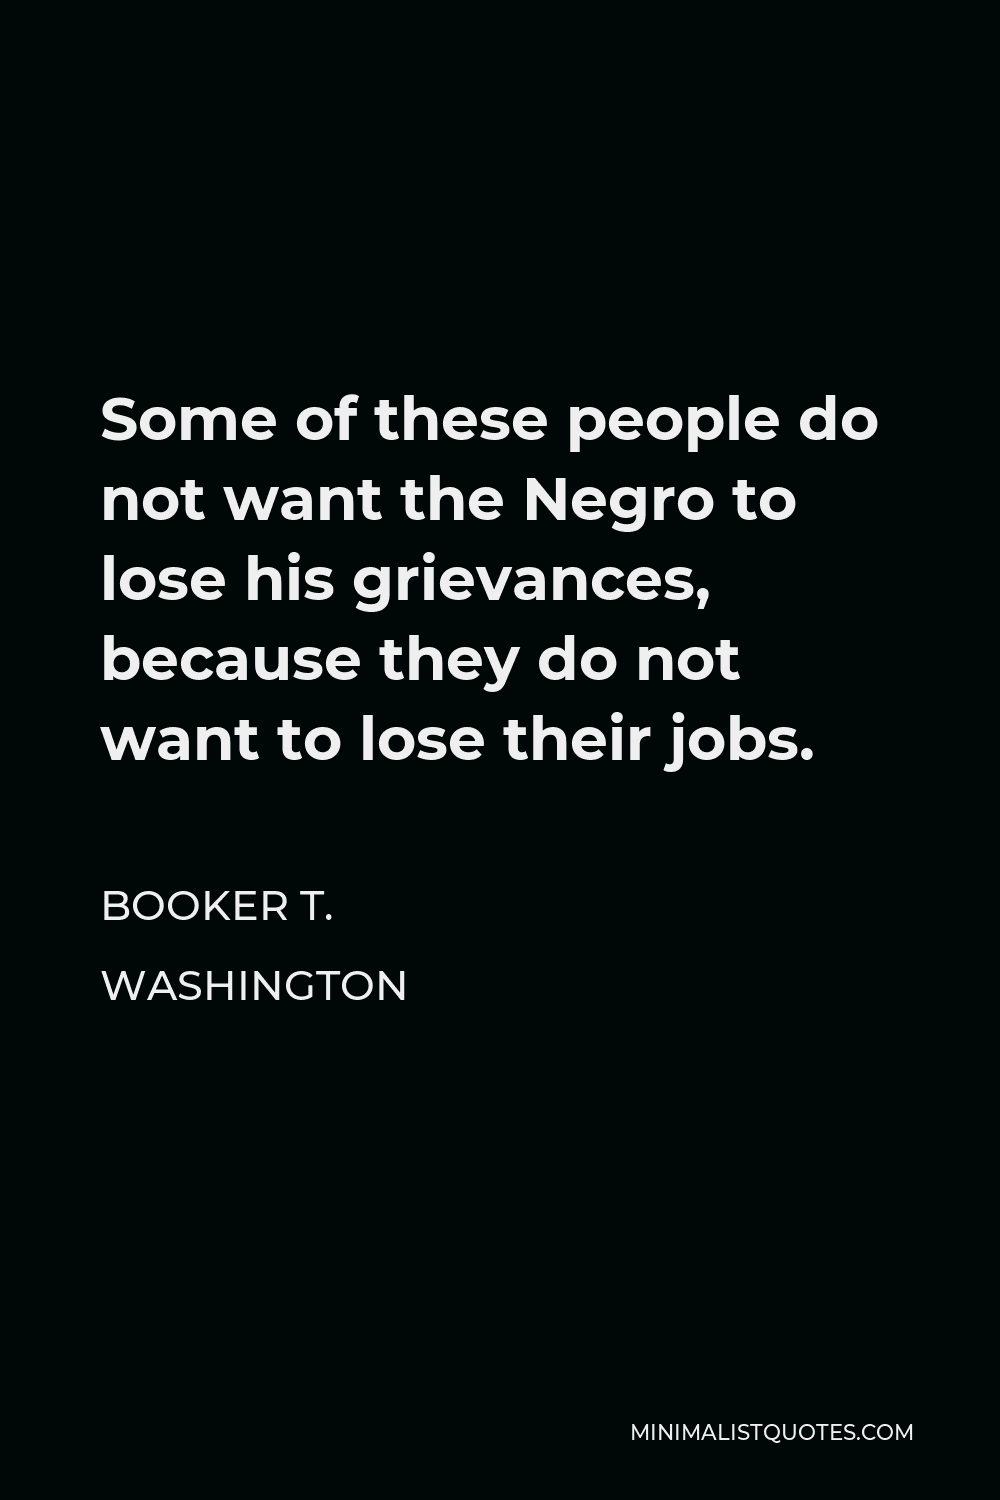 Booker T. Washington Quote - Some of these people do not want the Negro to lose his grievances, because they do not want to lose their jobs.